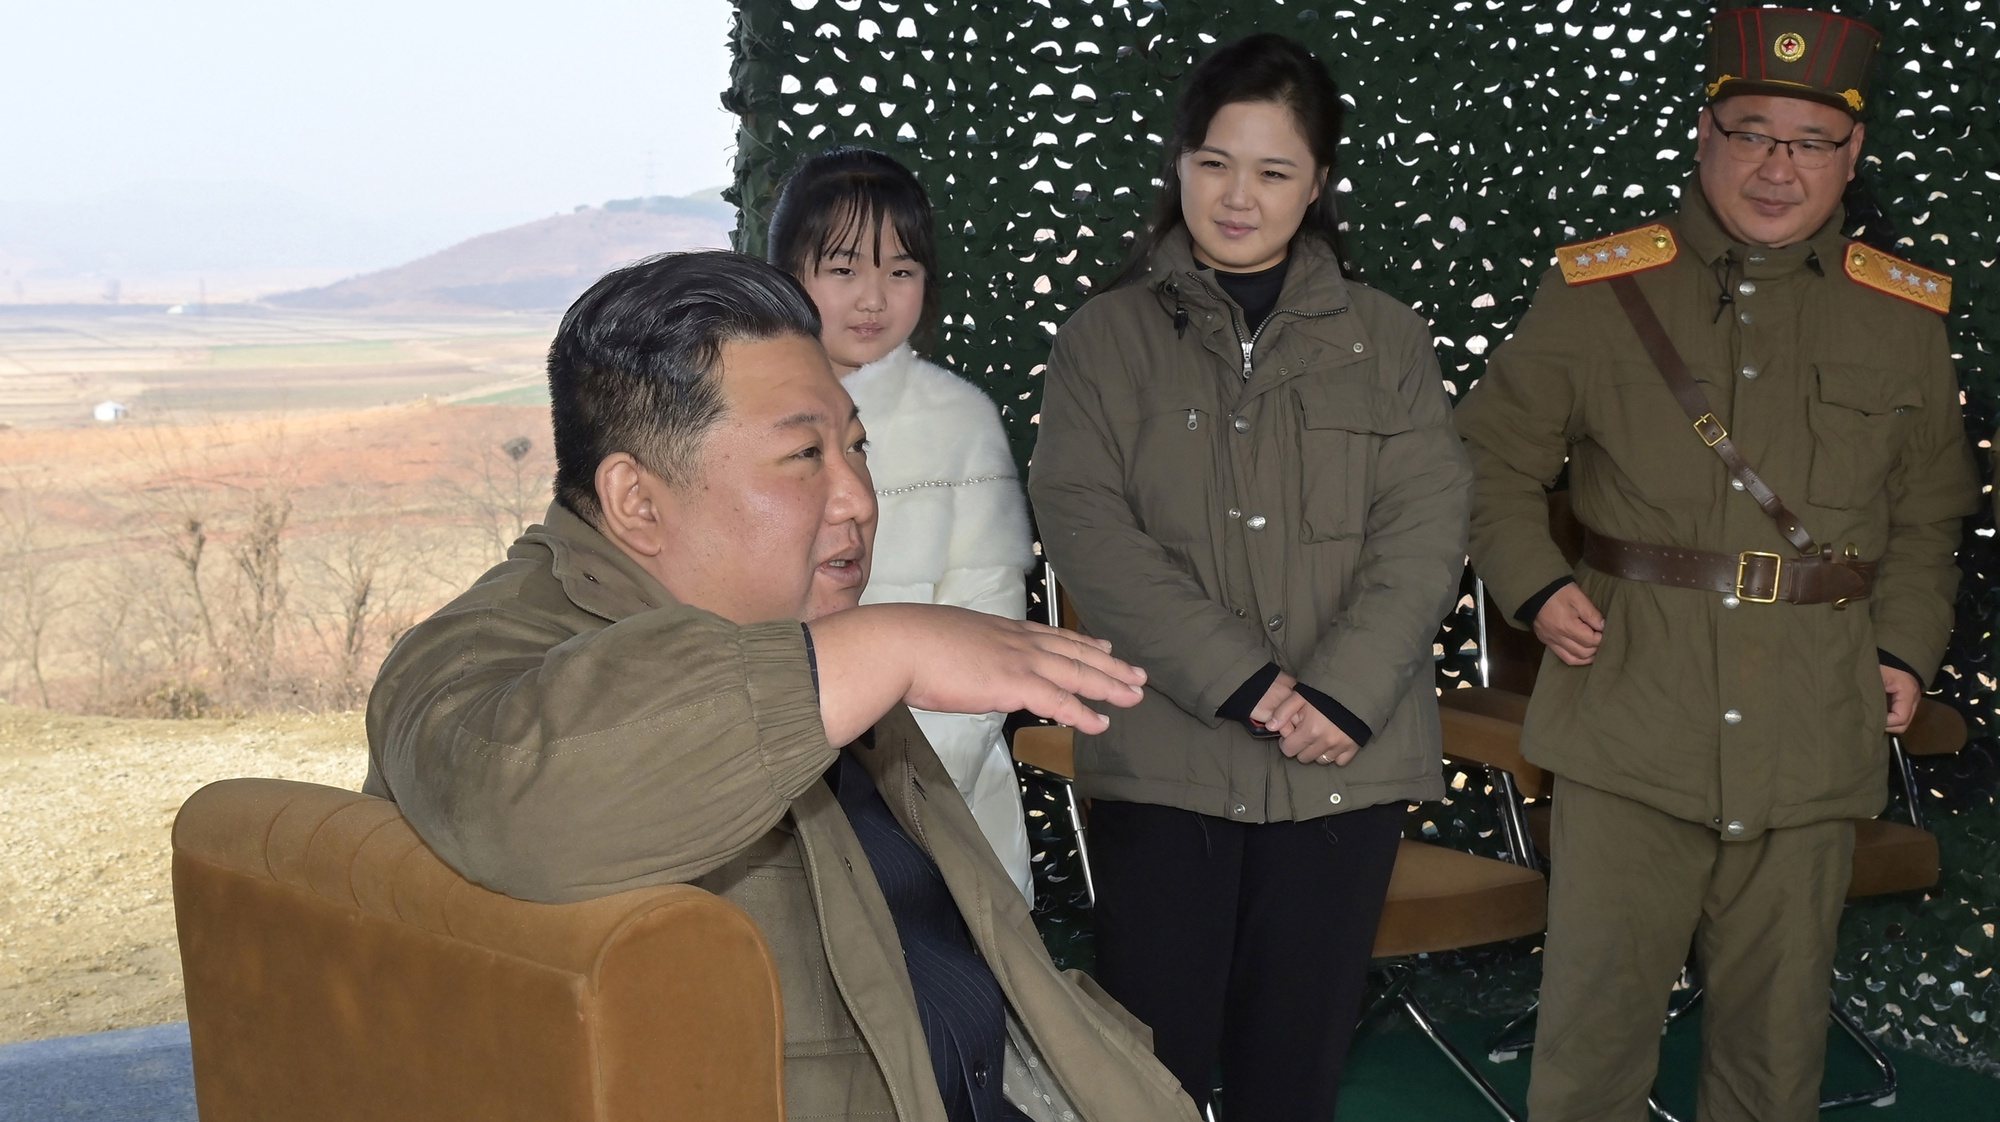 epa10313520 A photo released by the official North Korean Central News Agency (KCNA) shows North Korean leader Kim Jong-Un (L), accompanied by his daughter (2-L), and his wife Ri Sol Ju (3-L), during the test firing of a new type of intercontinental ballistic missile (ICBM) Hwasongpho-17 at Pyongyang International airport in Pyongyang, North Korea, 18 November 2022 (Issued on 19 November 2022). According to KCNA, the missile traveled up to a maximum altitude of 6,040.9 kilometres and flew a distance of 999.2 kilometres for 4,135s before landing in open waters of the East Sea.

Thank you  EPA/KCNA   EDITORIAL USE ONLY